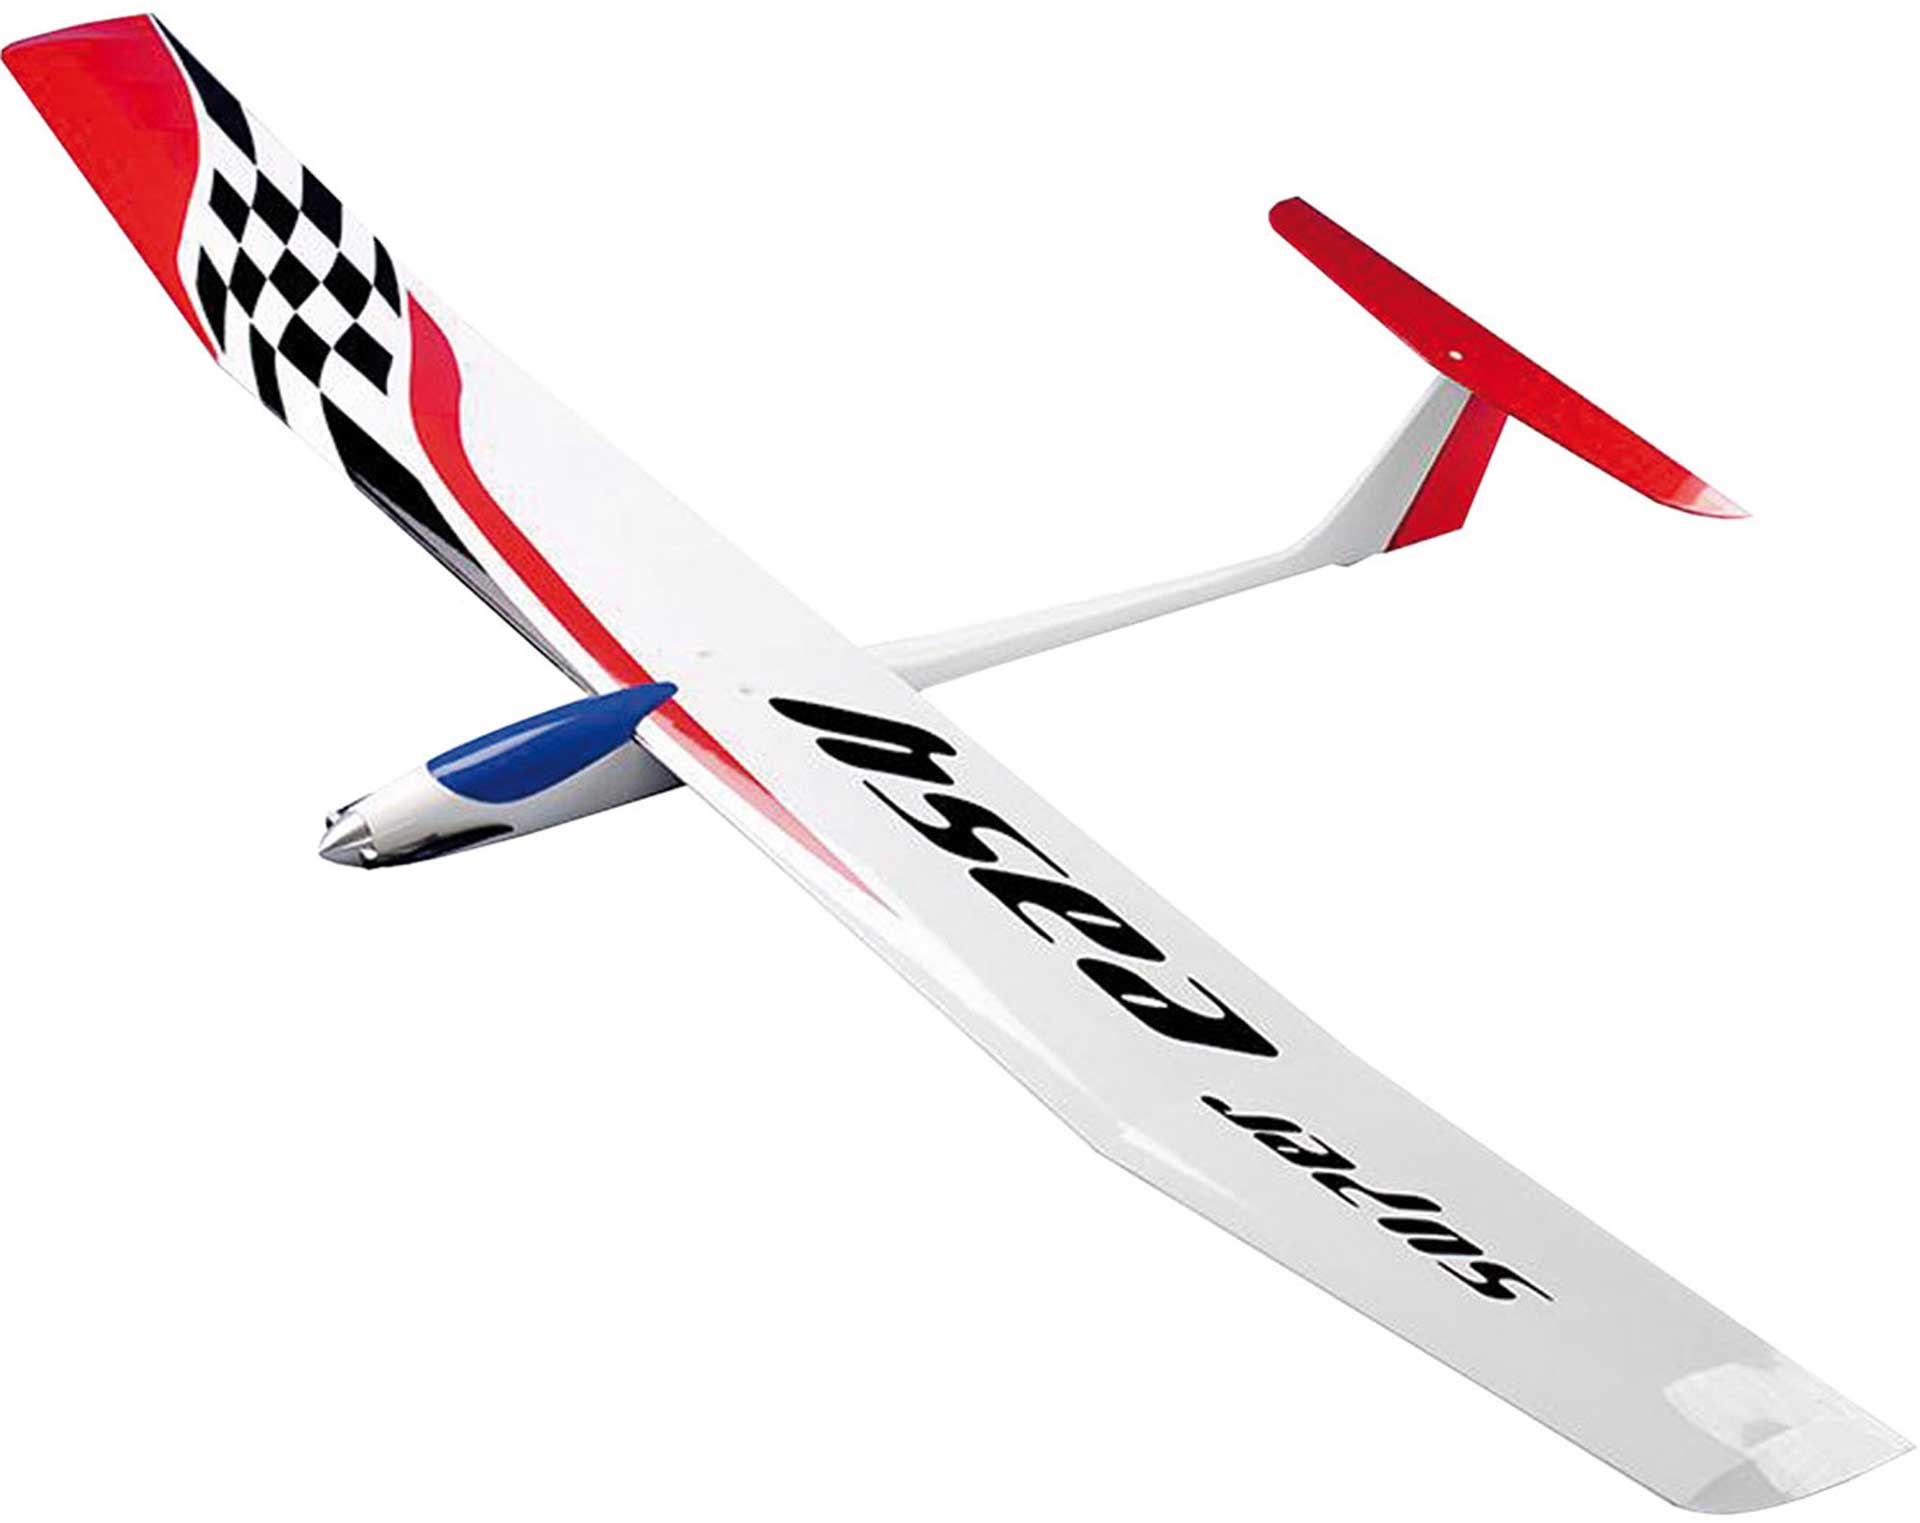 TOPMODEL SUPER EASY ELECTRO WITH GRP FUSELAGE AND RIBBED WING WITH FULL COMPOSITE FUSELAGE AND FINWINGS